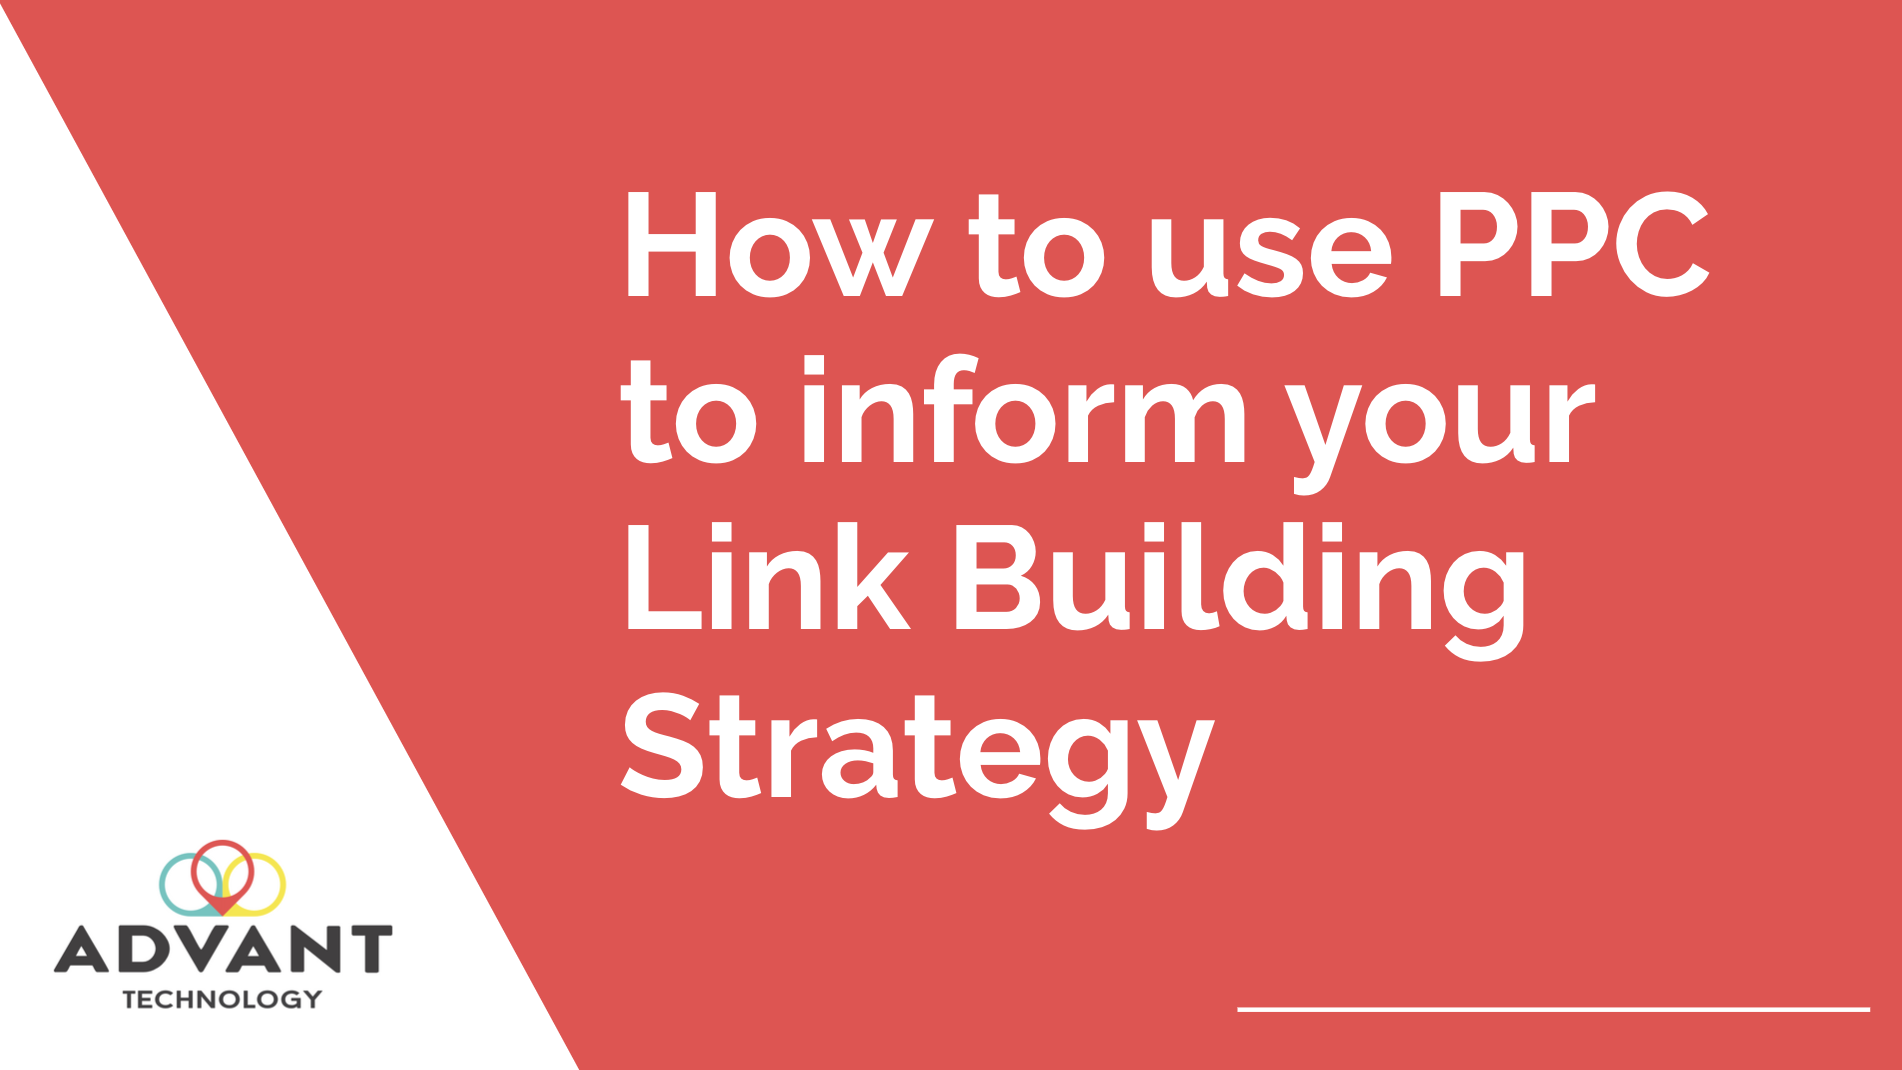 PPC to inform your Link Building Strategy - Advant Technology